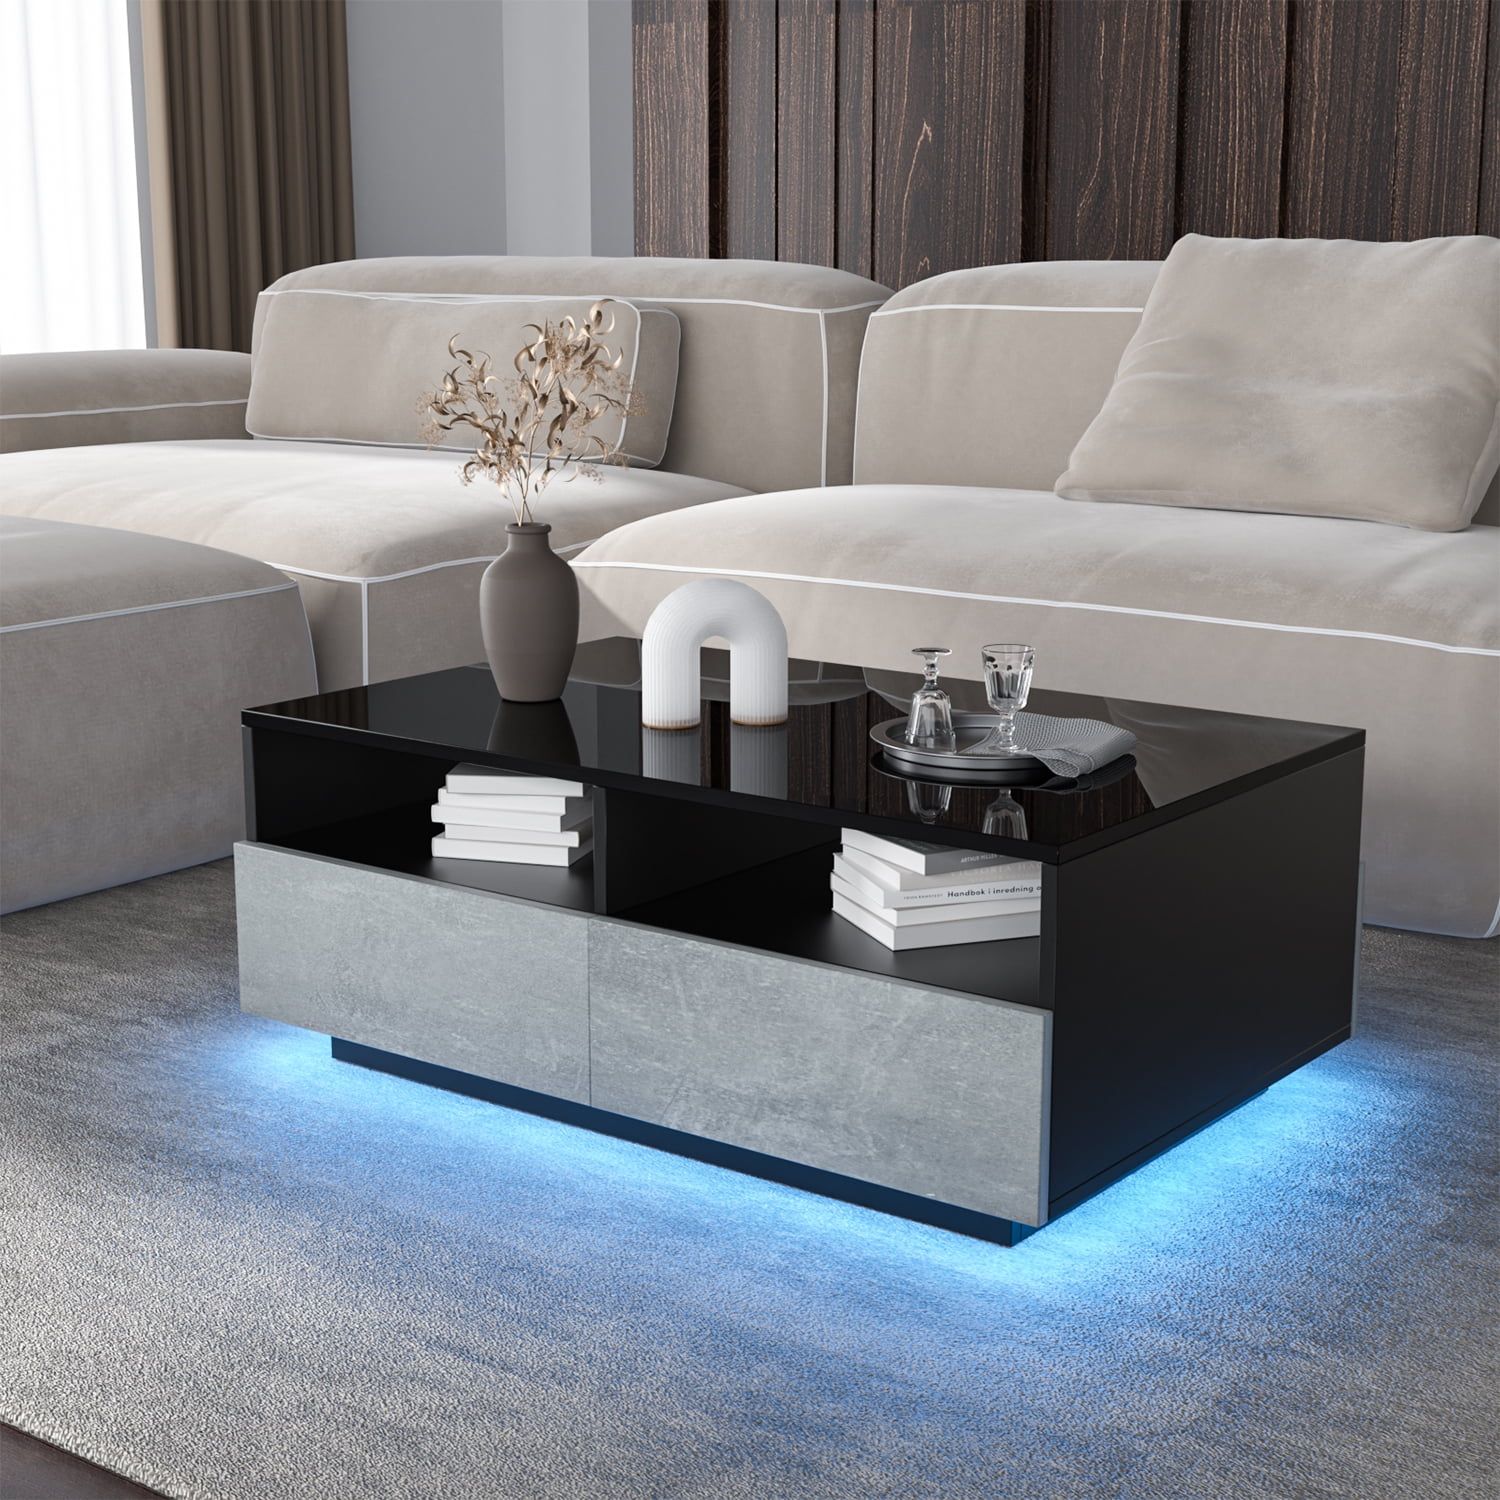 Hommpa Coffee Table Rgb Led Rectangular Center Table With Remote Control  Mordern Sofa Side Cocktail Storage Tables Gray Black For Living Room –  Walmart Inside Rectangular Led Coffee Tables (Photo 14 of 15)